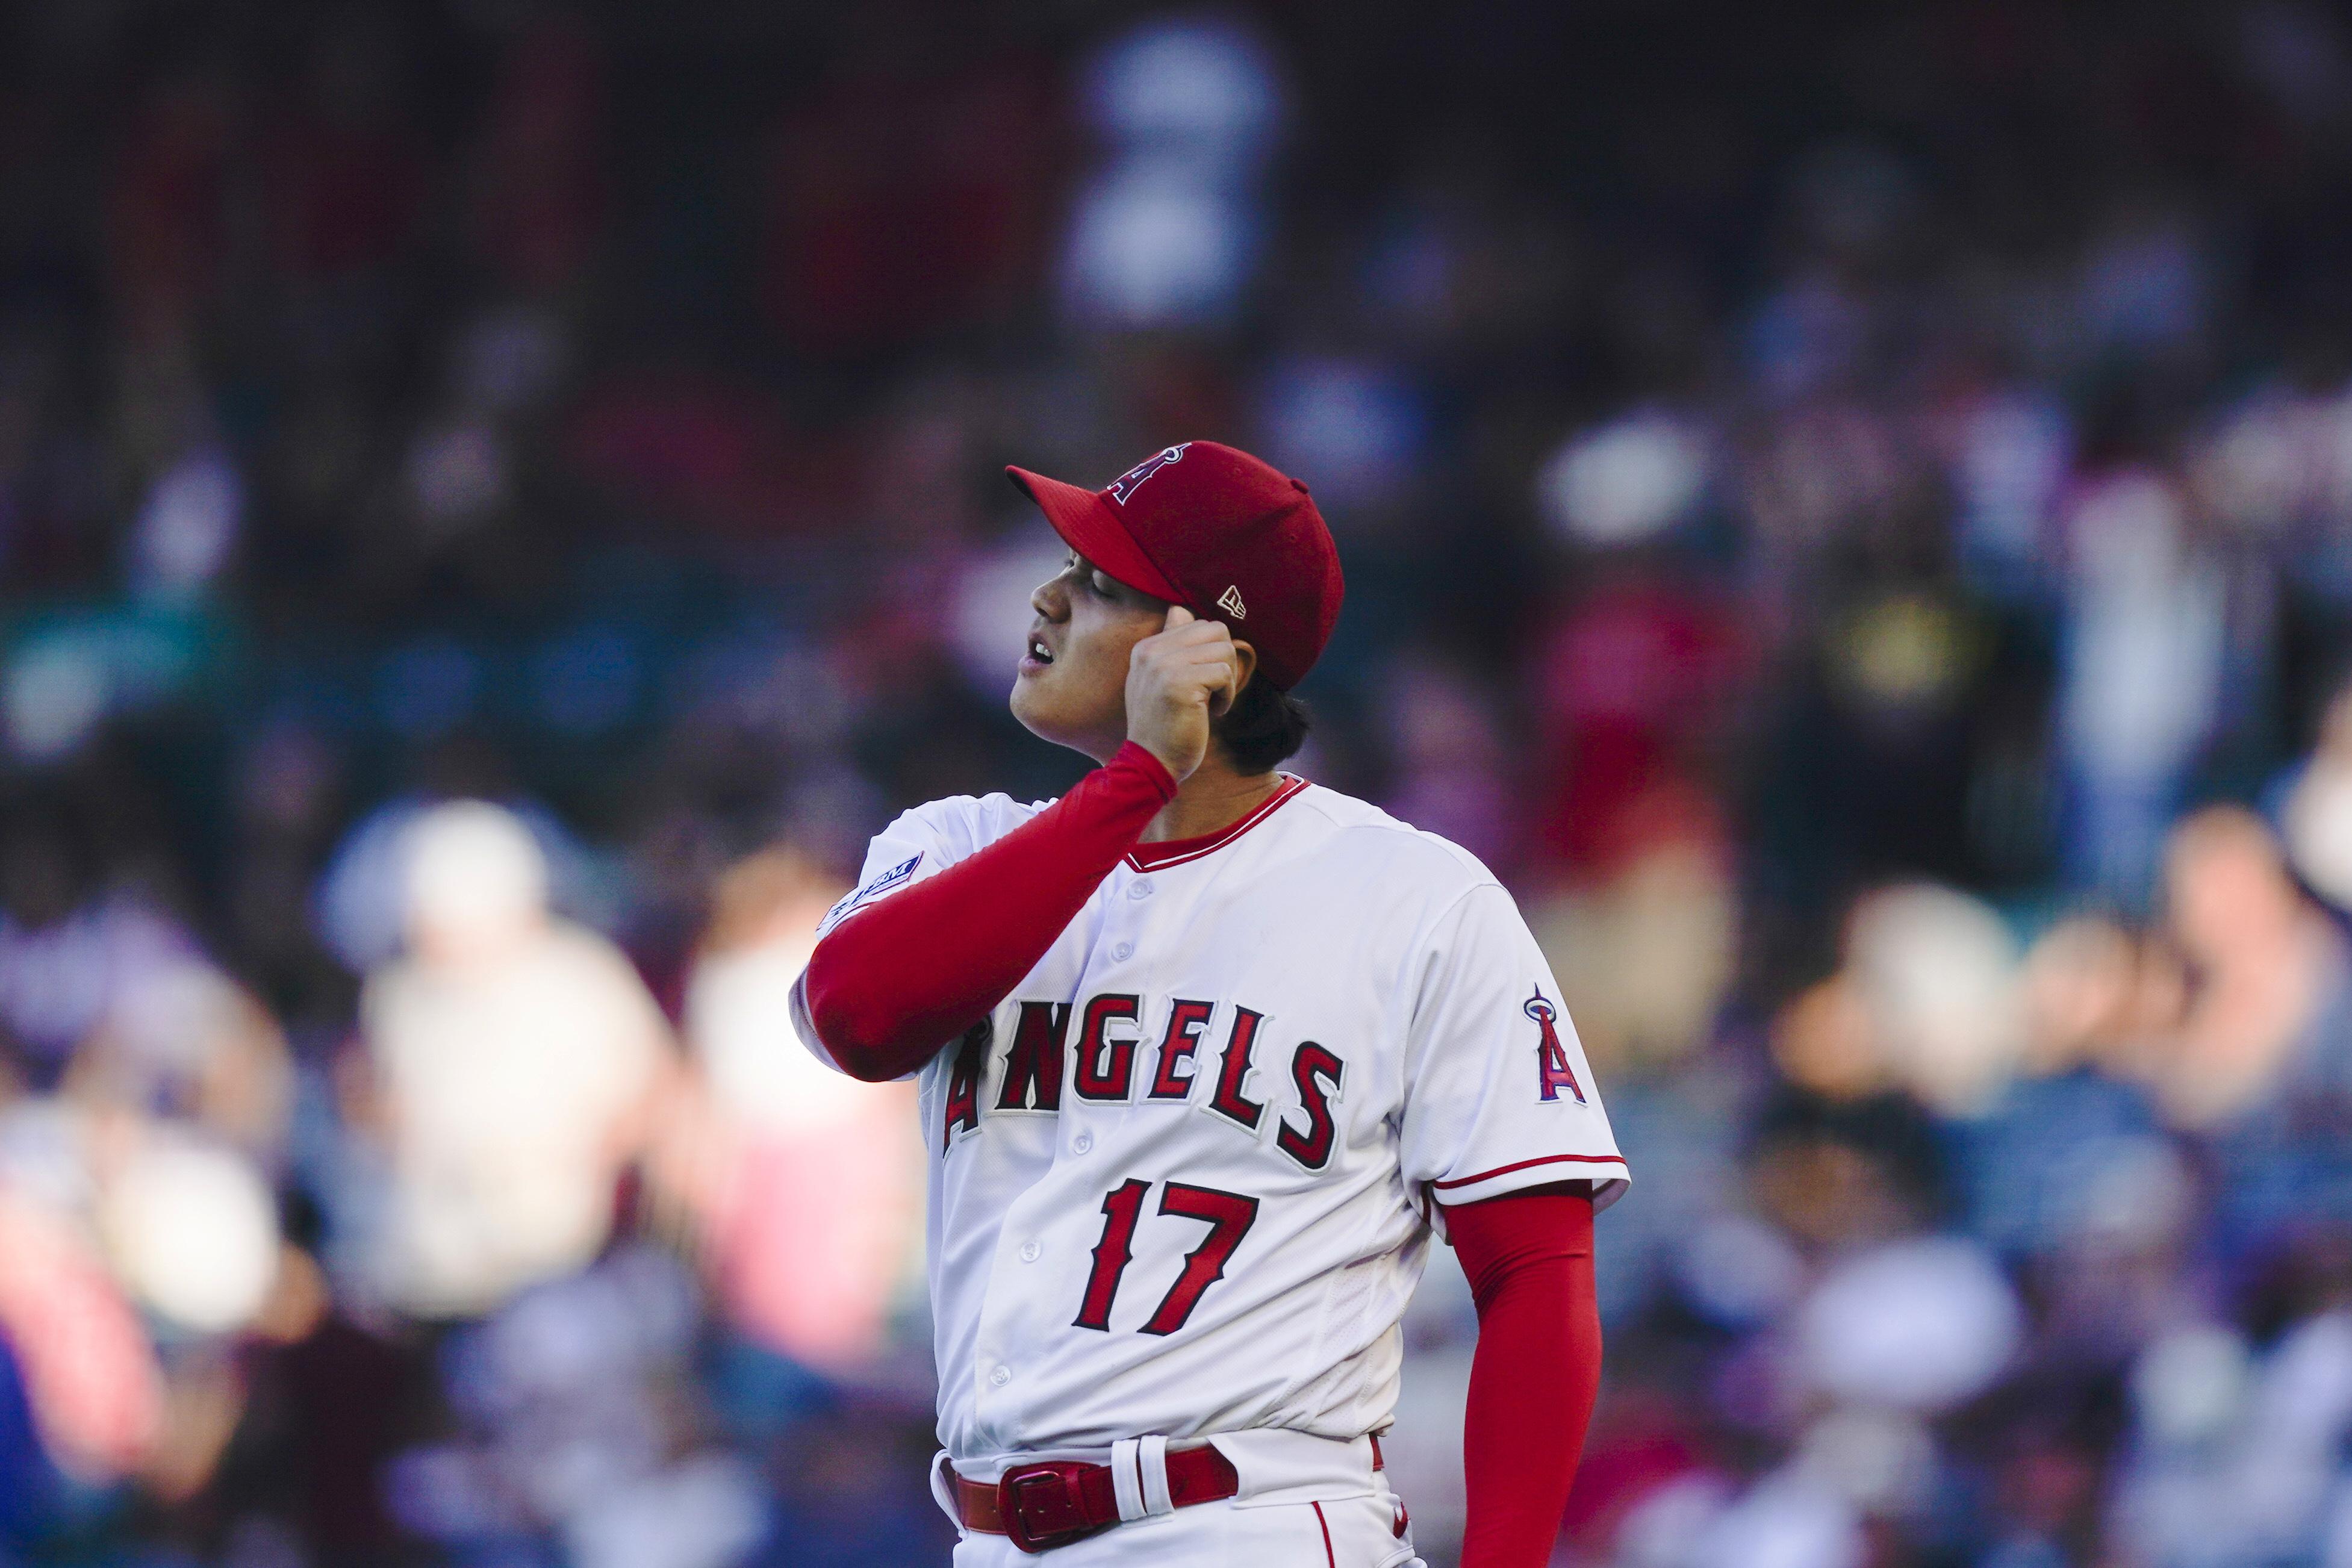 Angels' two-way All-Star Shohei Ohtani on the mound Tuesday